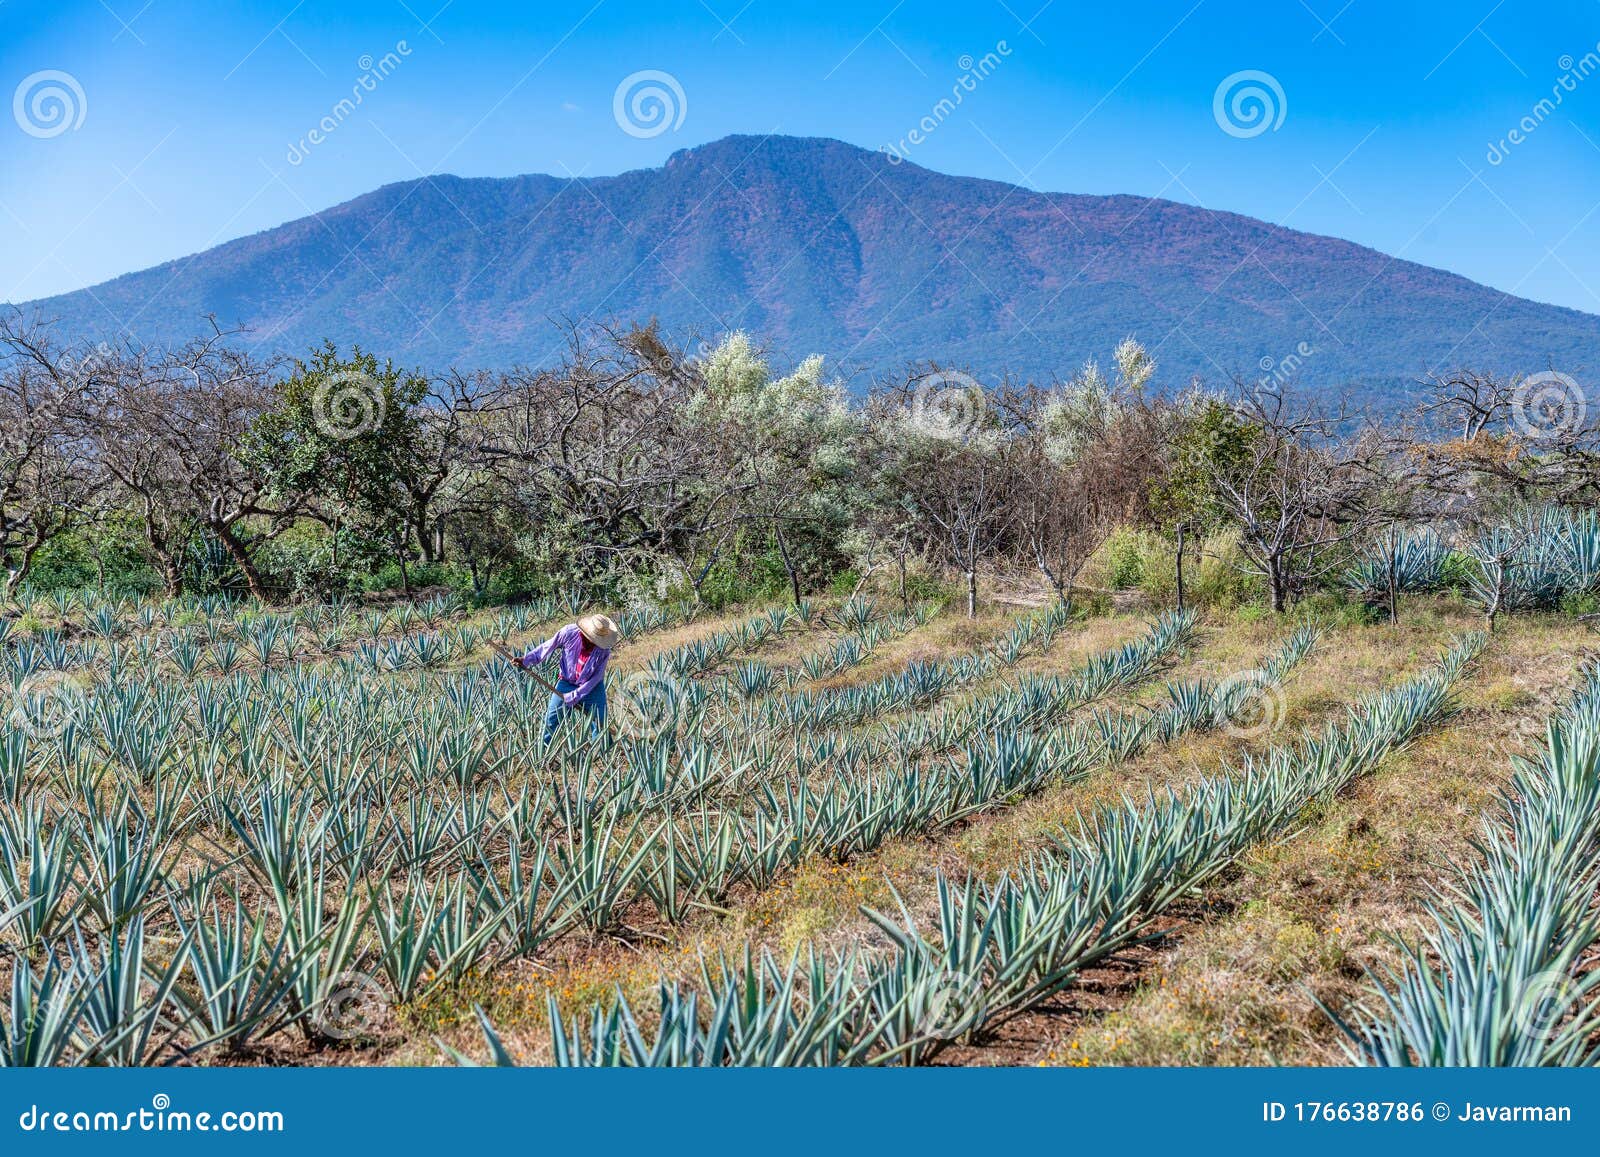 worker in blue agave field in tequila, jalisco, mexico